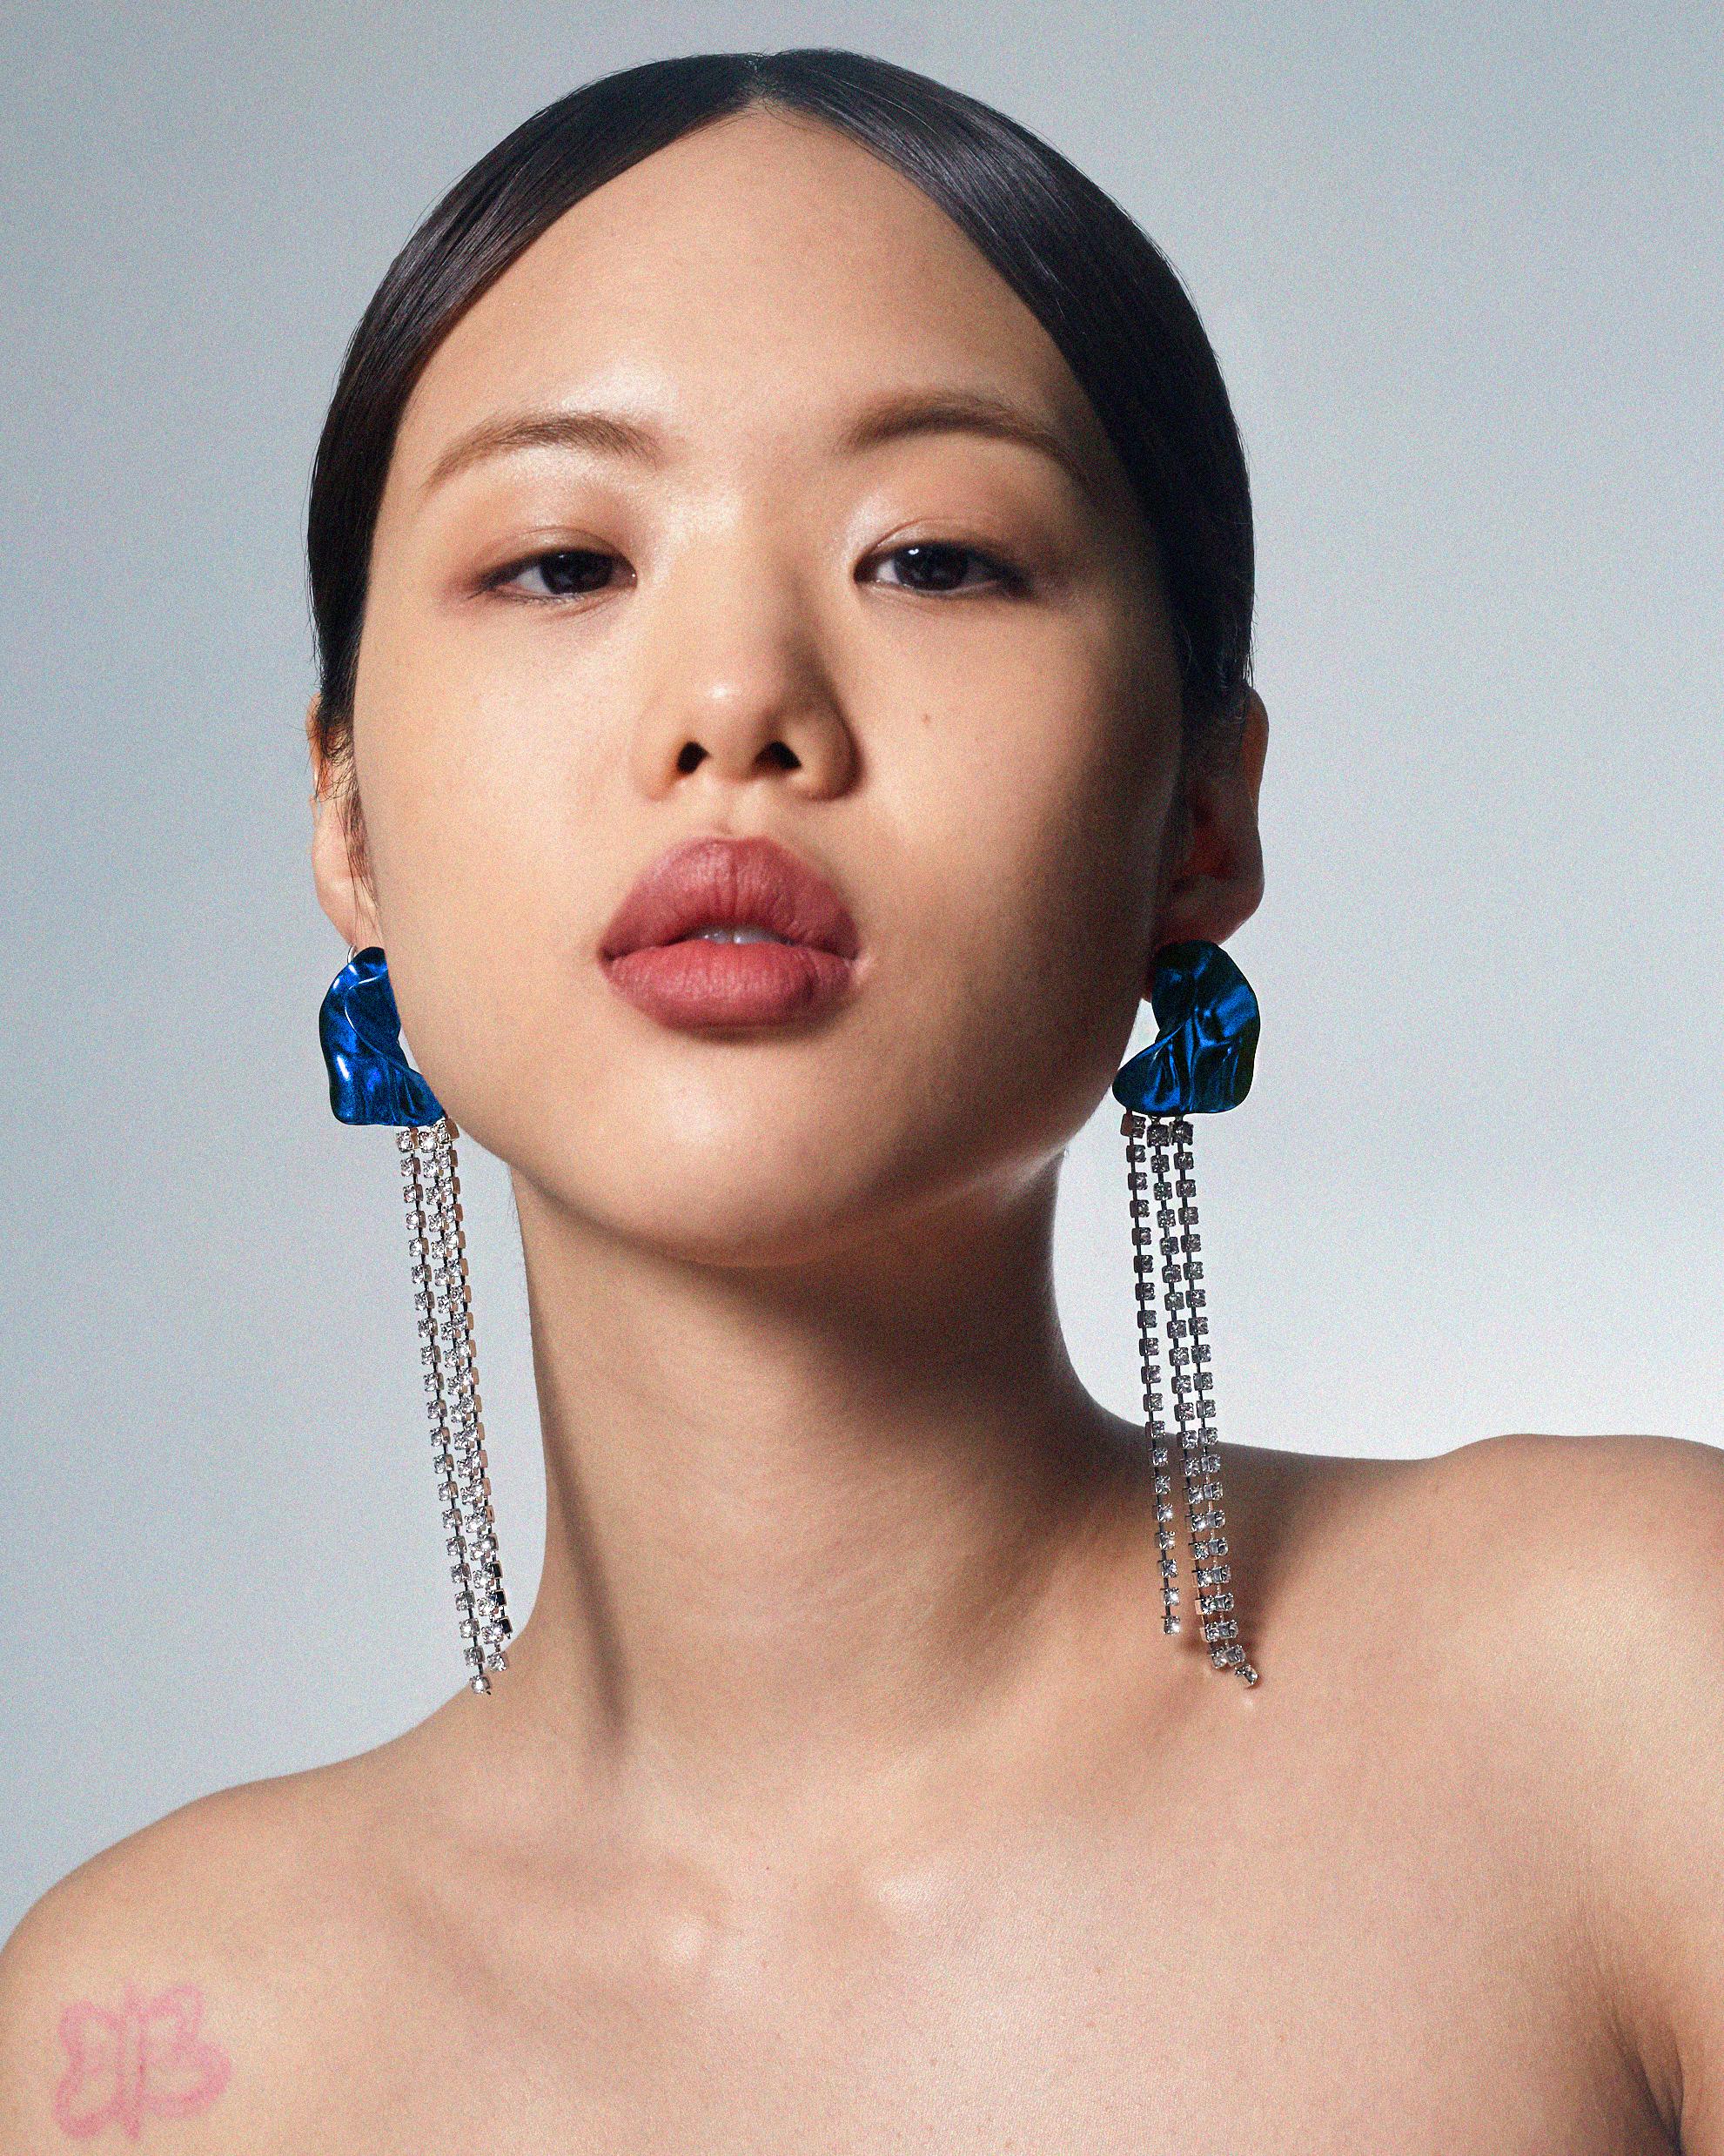 The Georgia crystal-embellished earrings from Sterling King feature a sculptural shape with cascading crystals. Inspired by the works of Georgia O'Keeffe, these floral-inspired earrings are finished with a vibrant metallic blue. Lightweight and